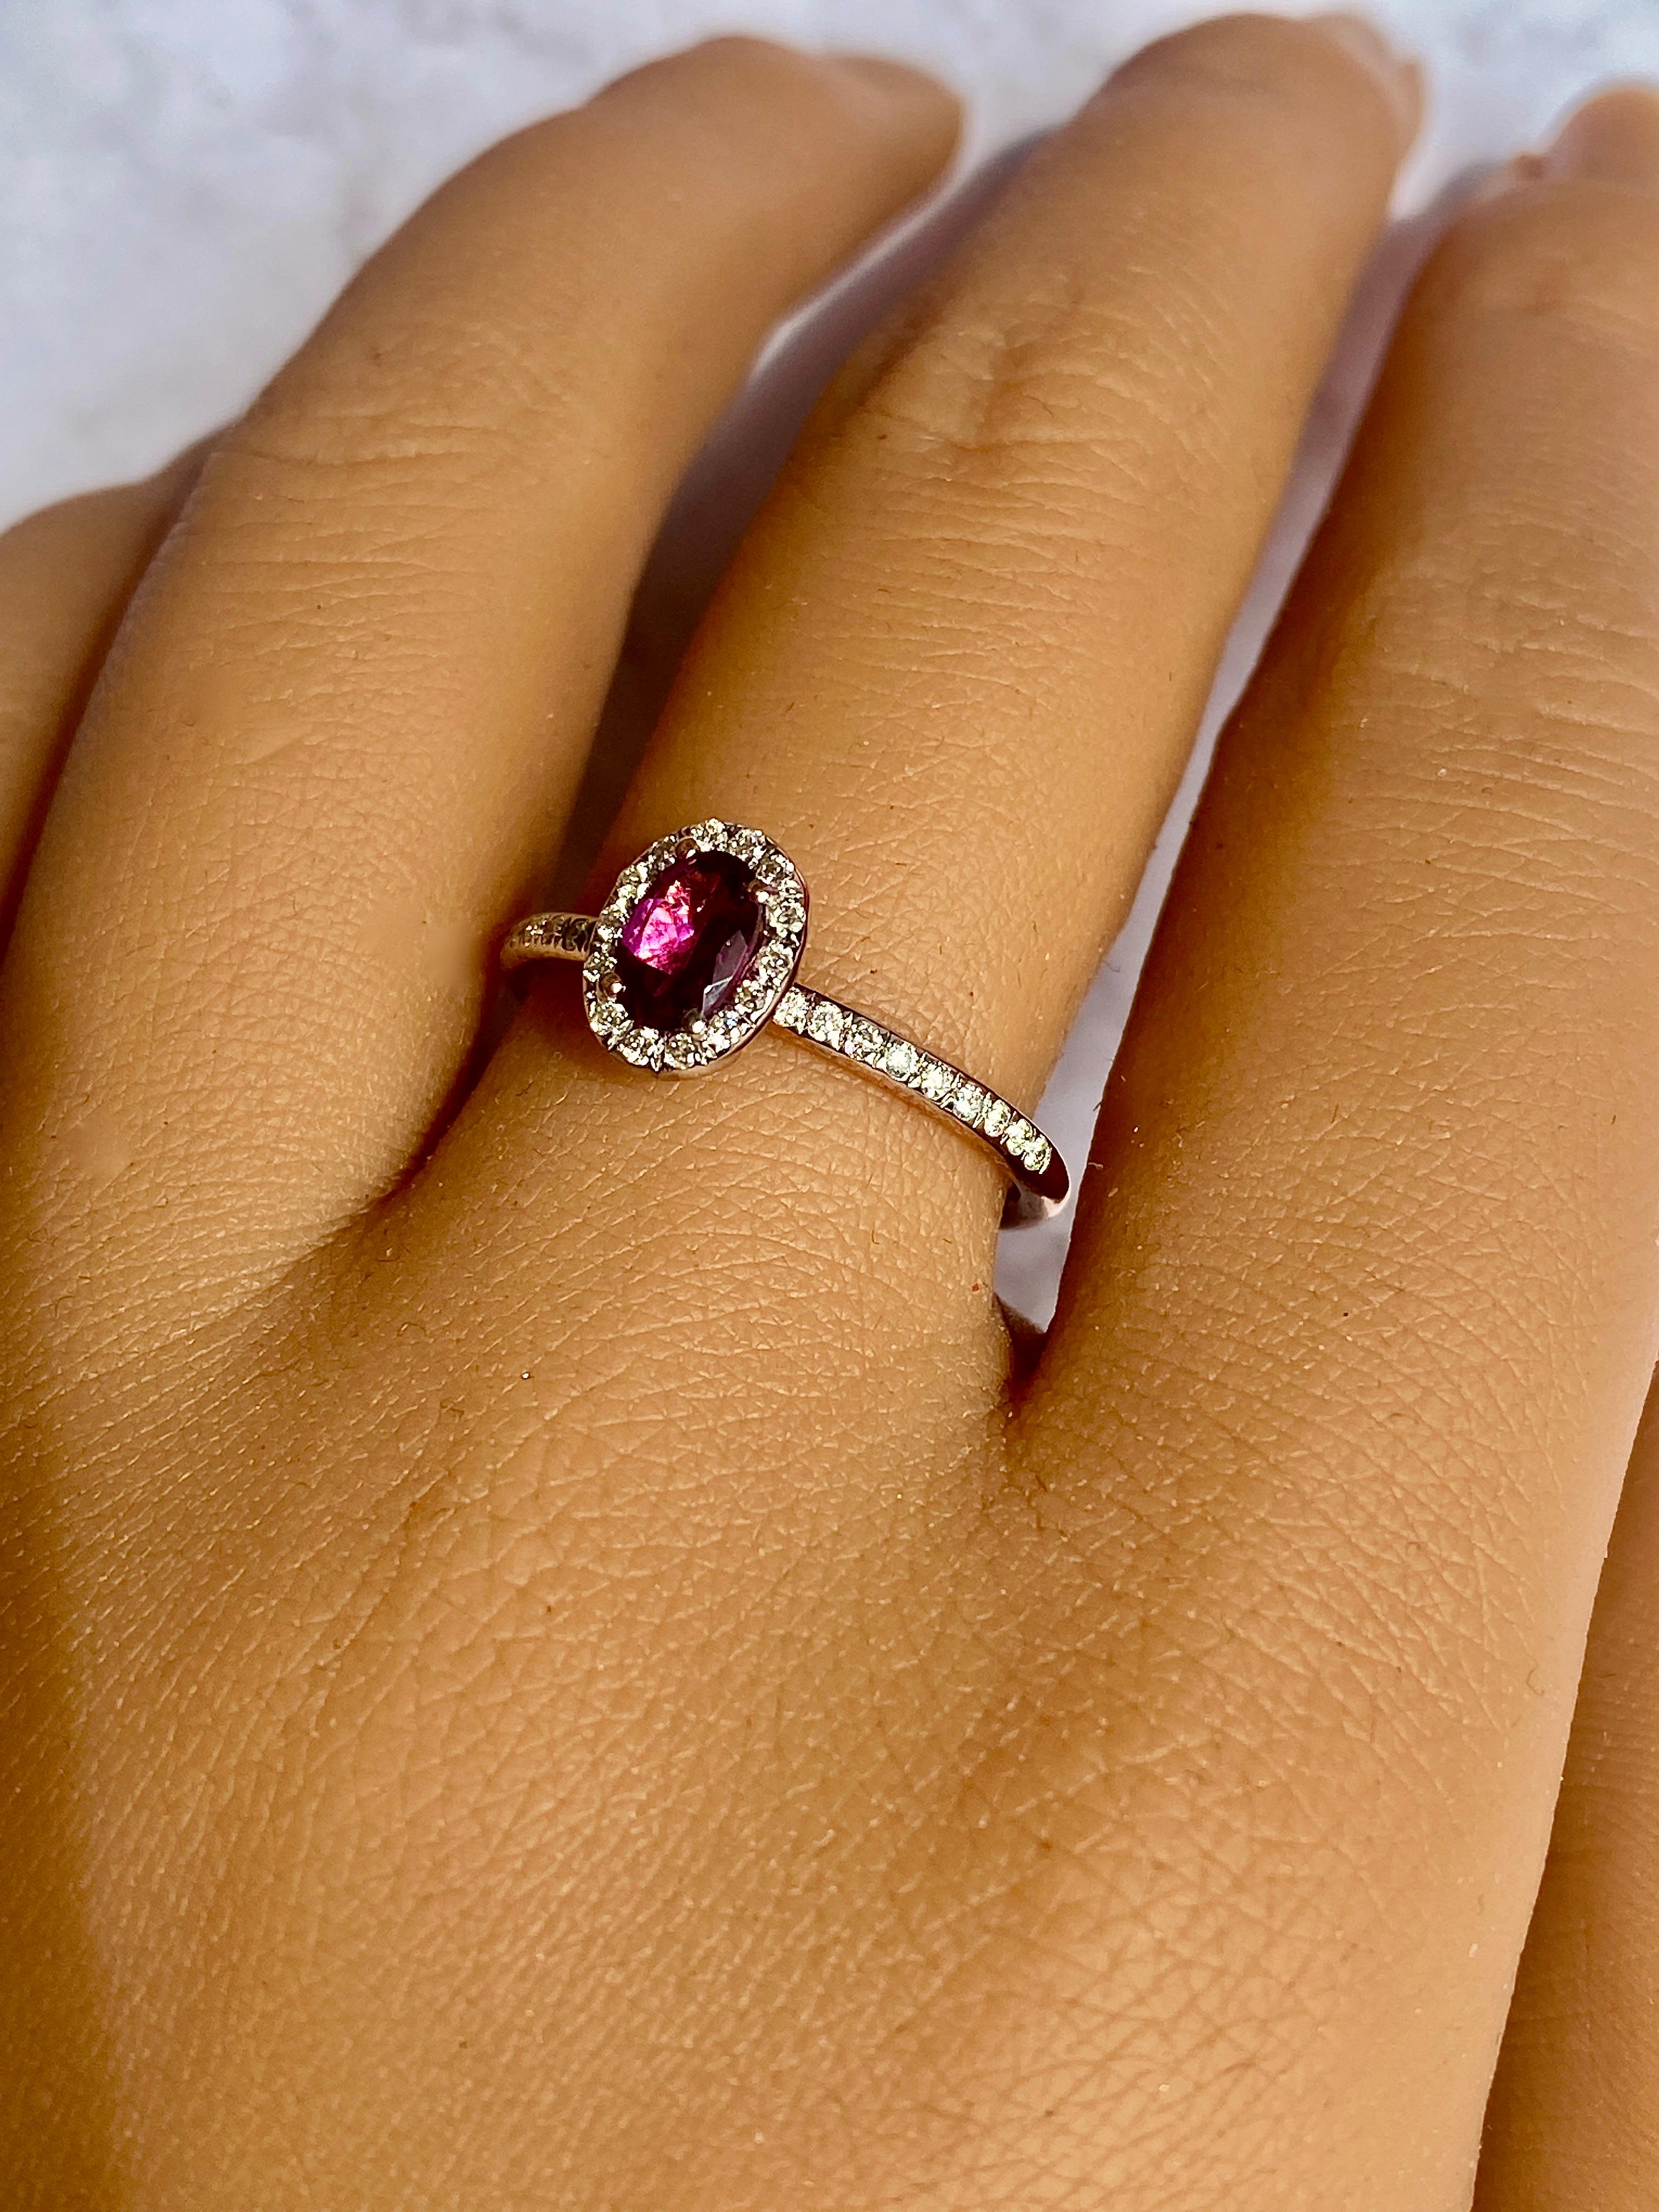 For Sale:  Gemstone Solitaire Ring Stack, 14k Solid Gold Rings with Natural Round Diamonds 5